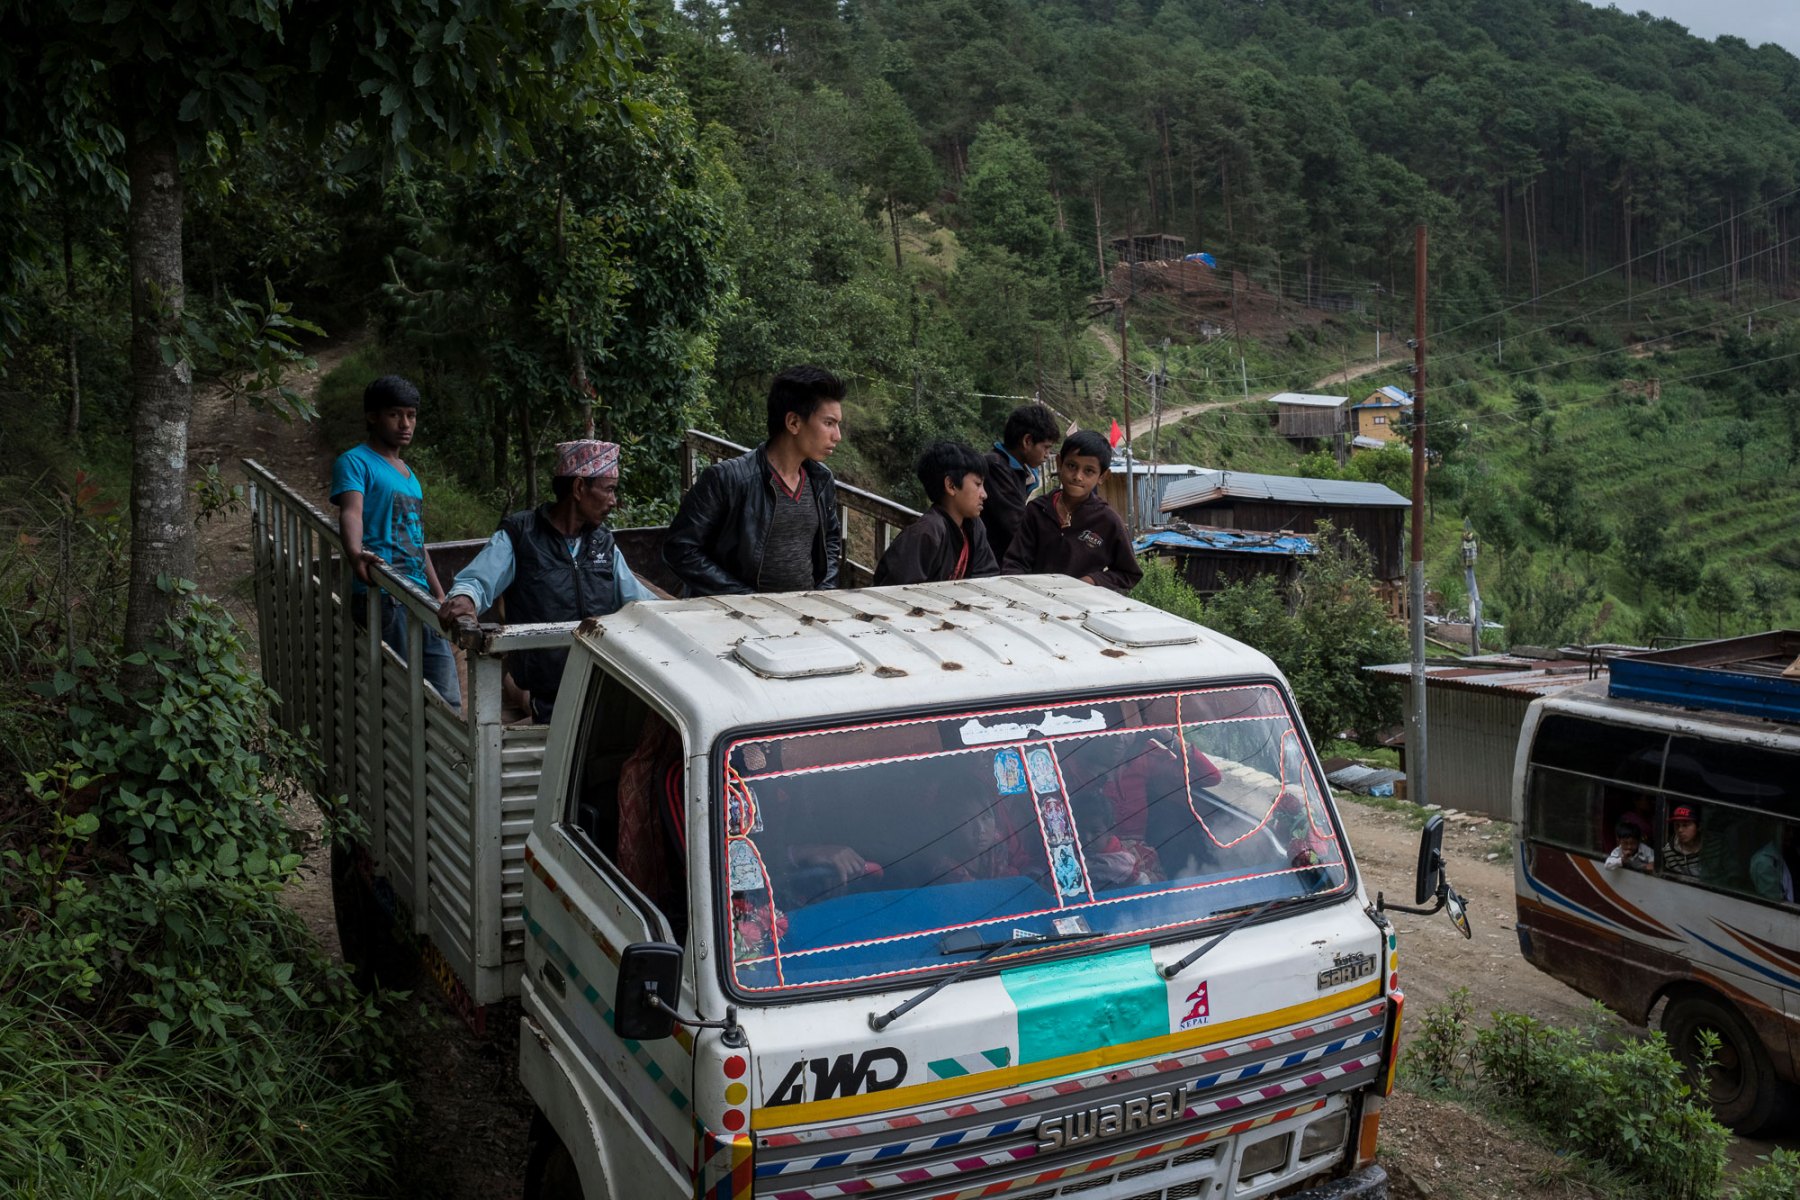 Men travel in the back of a truck out of Chaubas, Kavre district, Nepal.